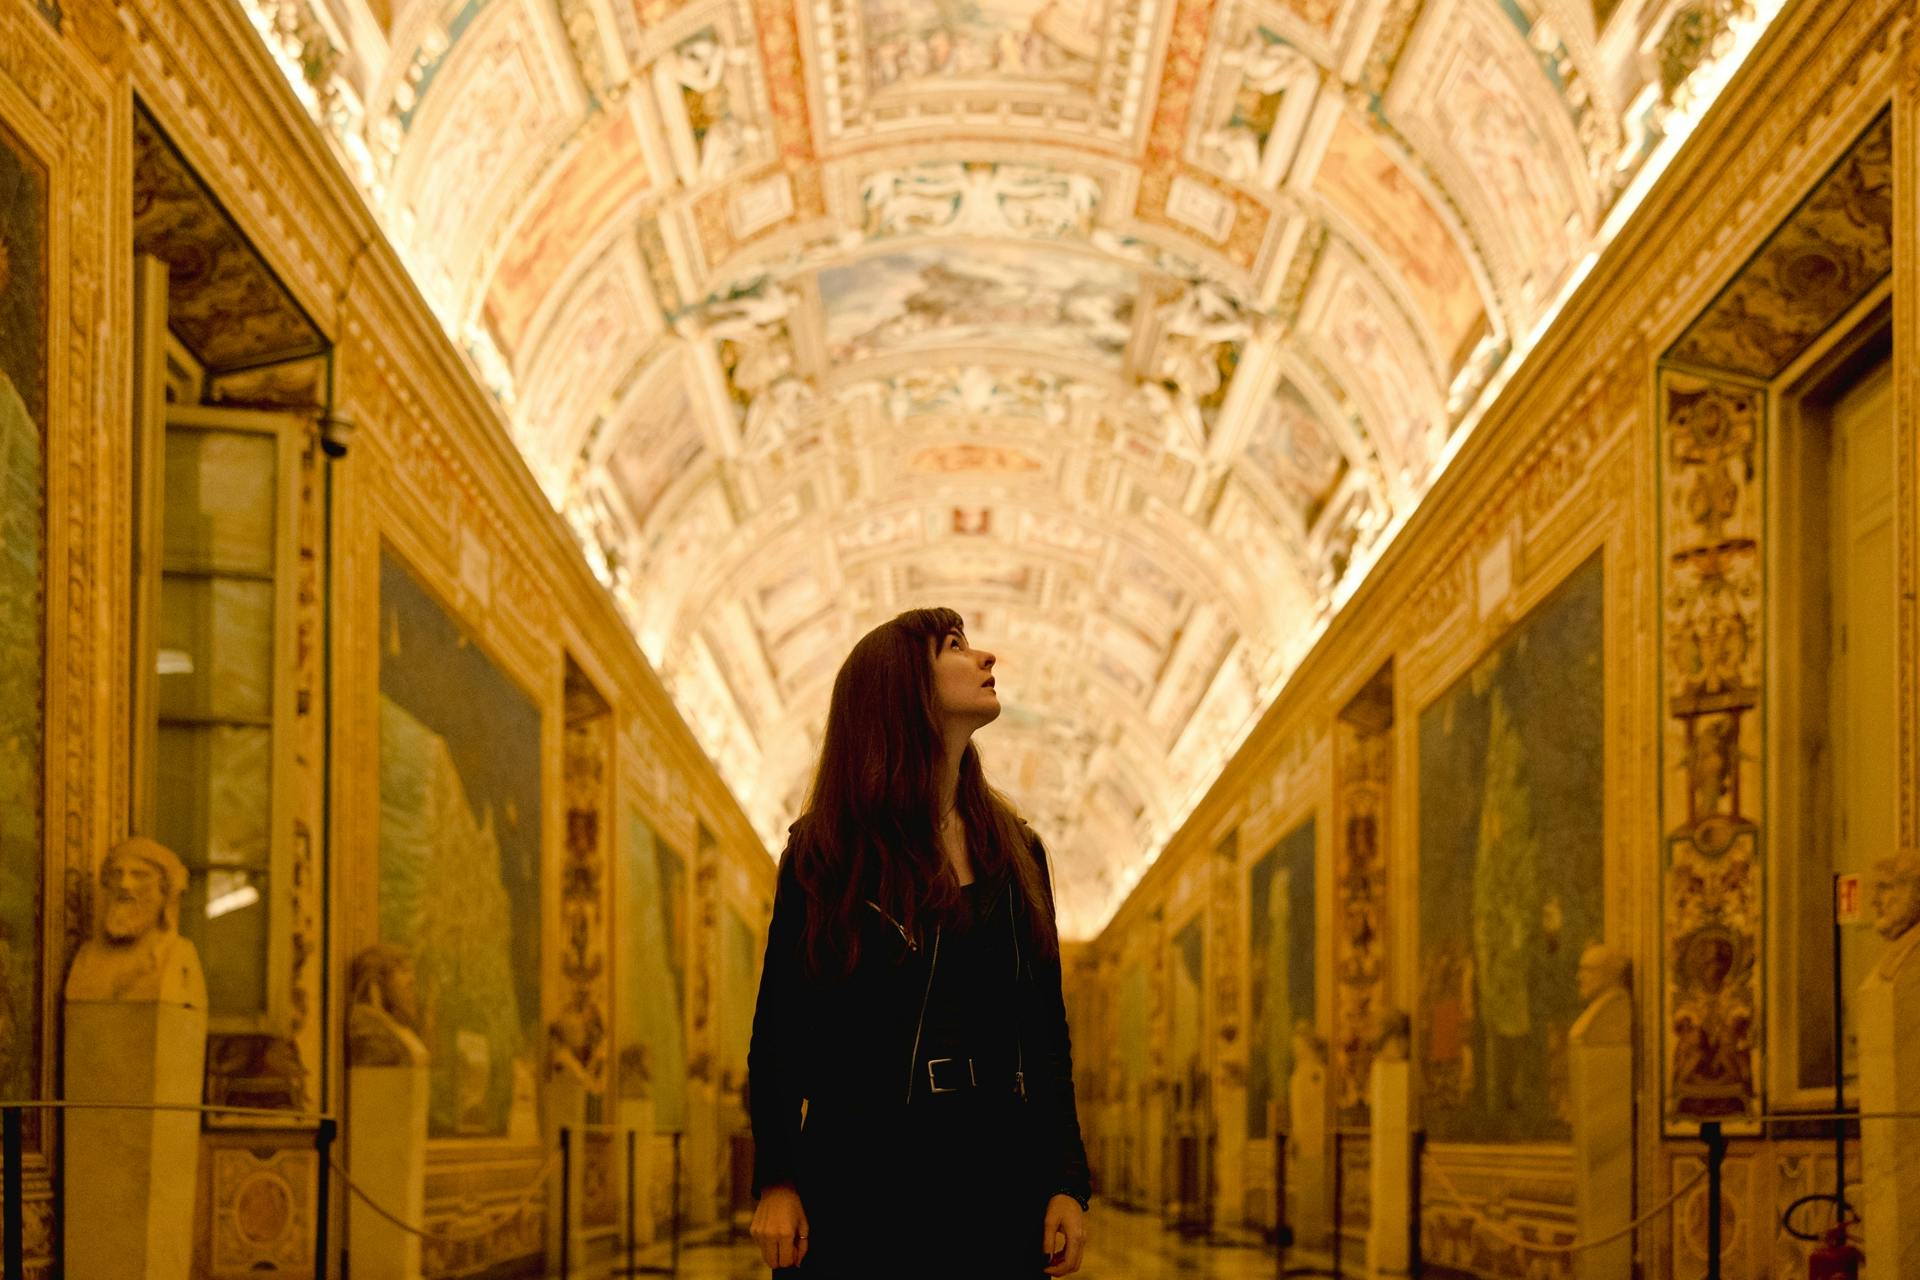 Vatican Museums’s Key Master early entrance tour with Sistine Chapel